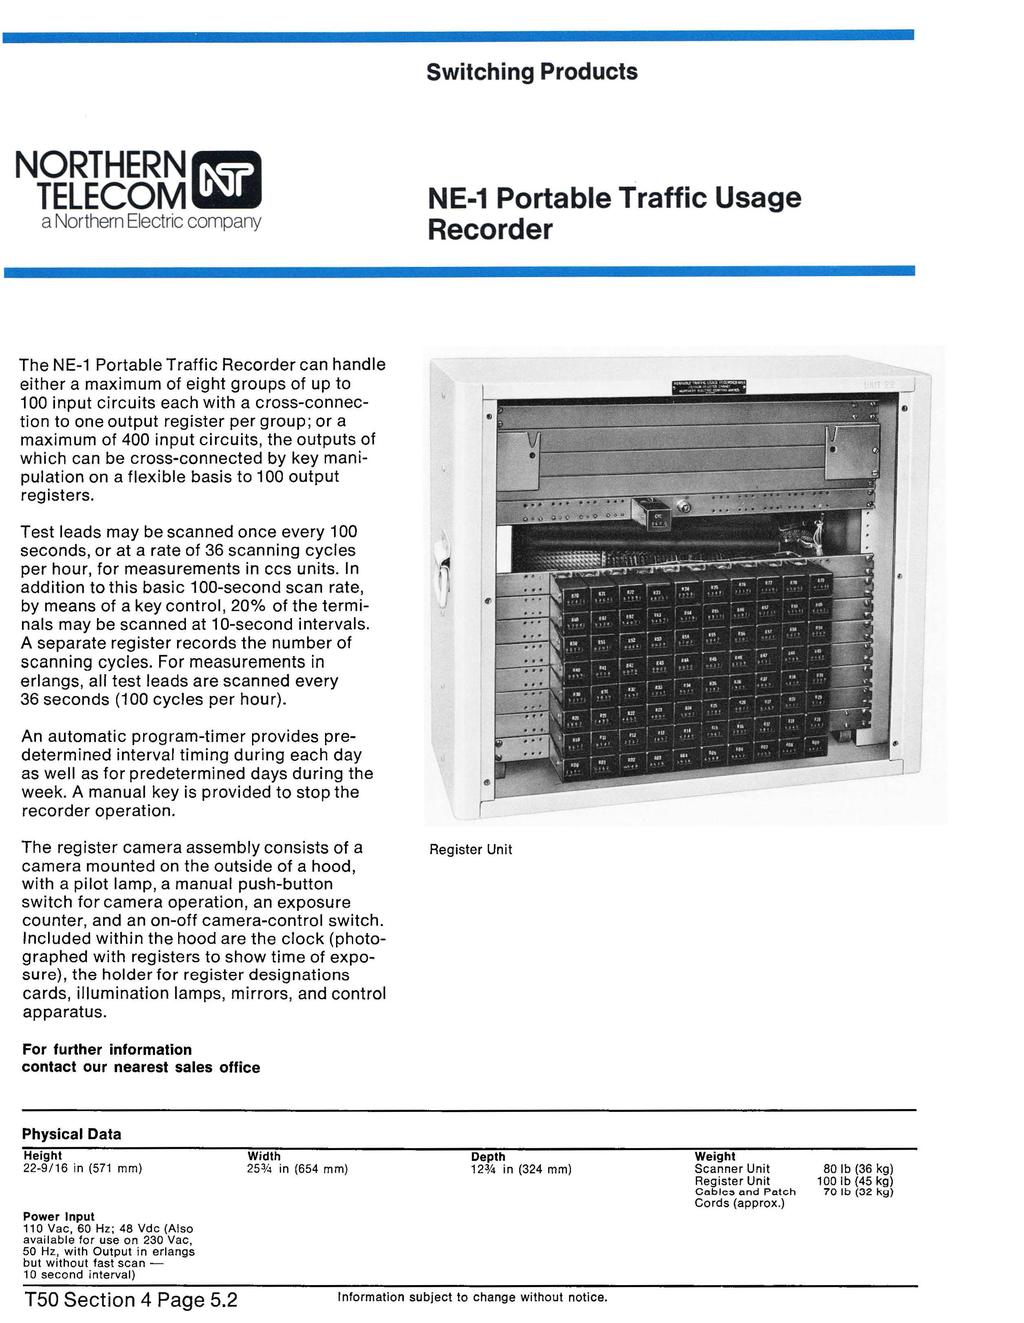 NE-1 Portable Traffic Usage Recorder The NE-1 Portable Traffic Recorder can handle either a maximum of eight groups of up to 100 input circuits each with a cross-connection to one output register per